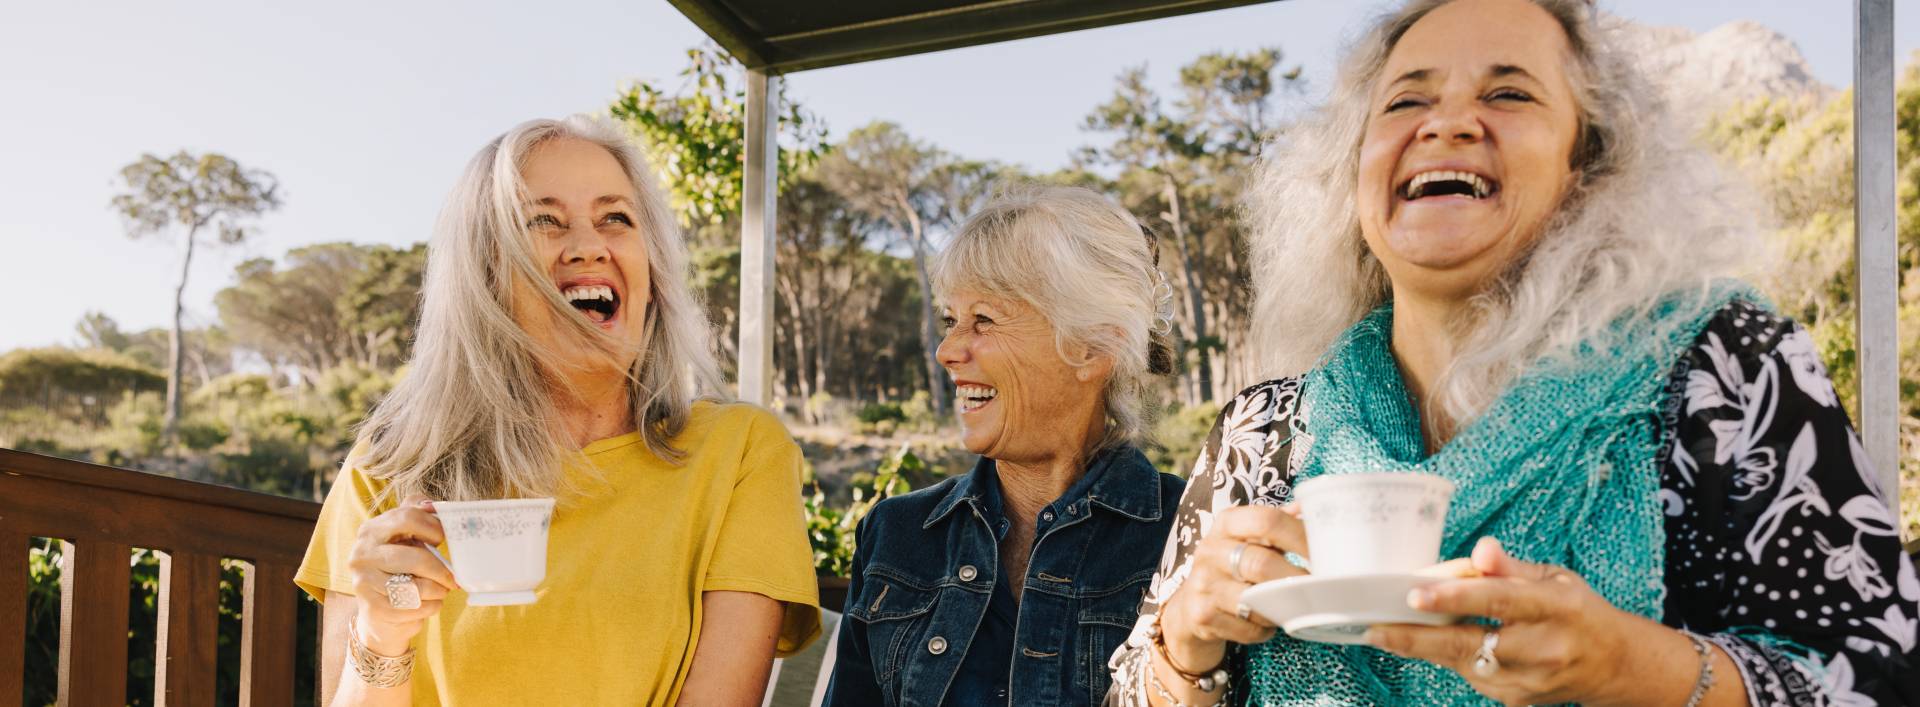 three senior ladies sitting on a bench outside drinking coffee and laughing together